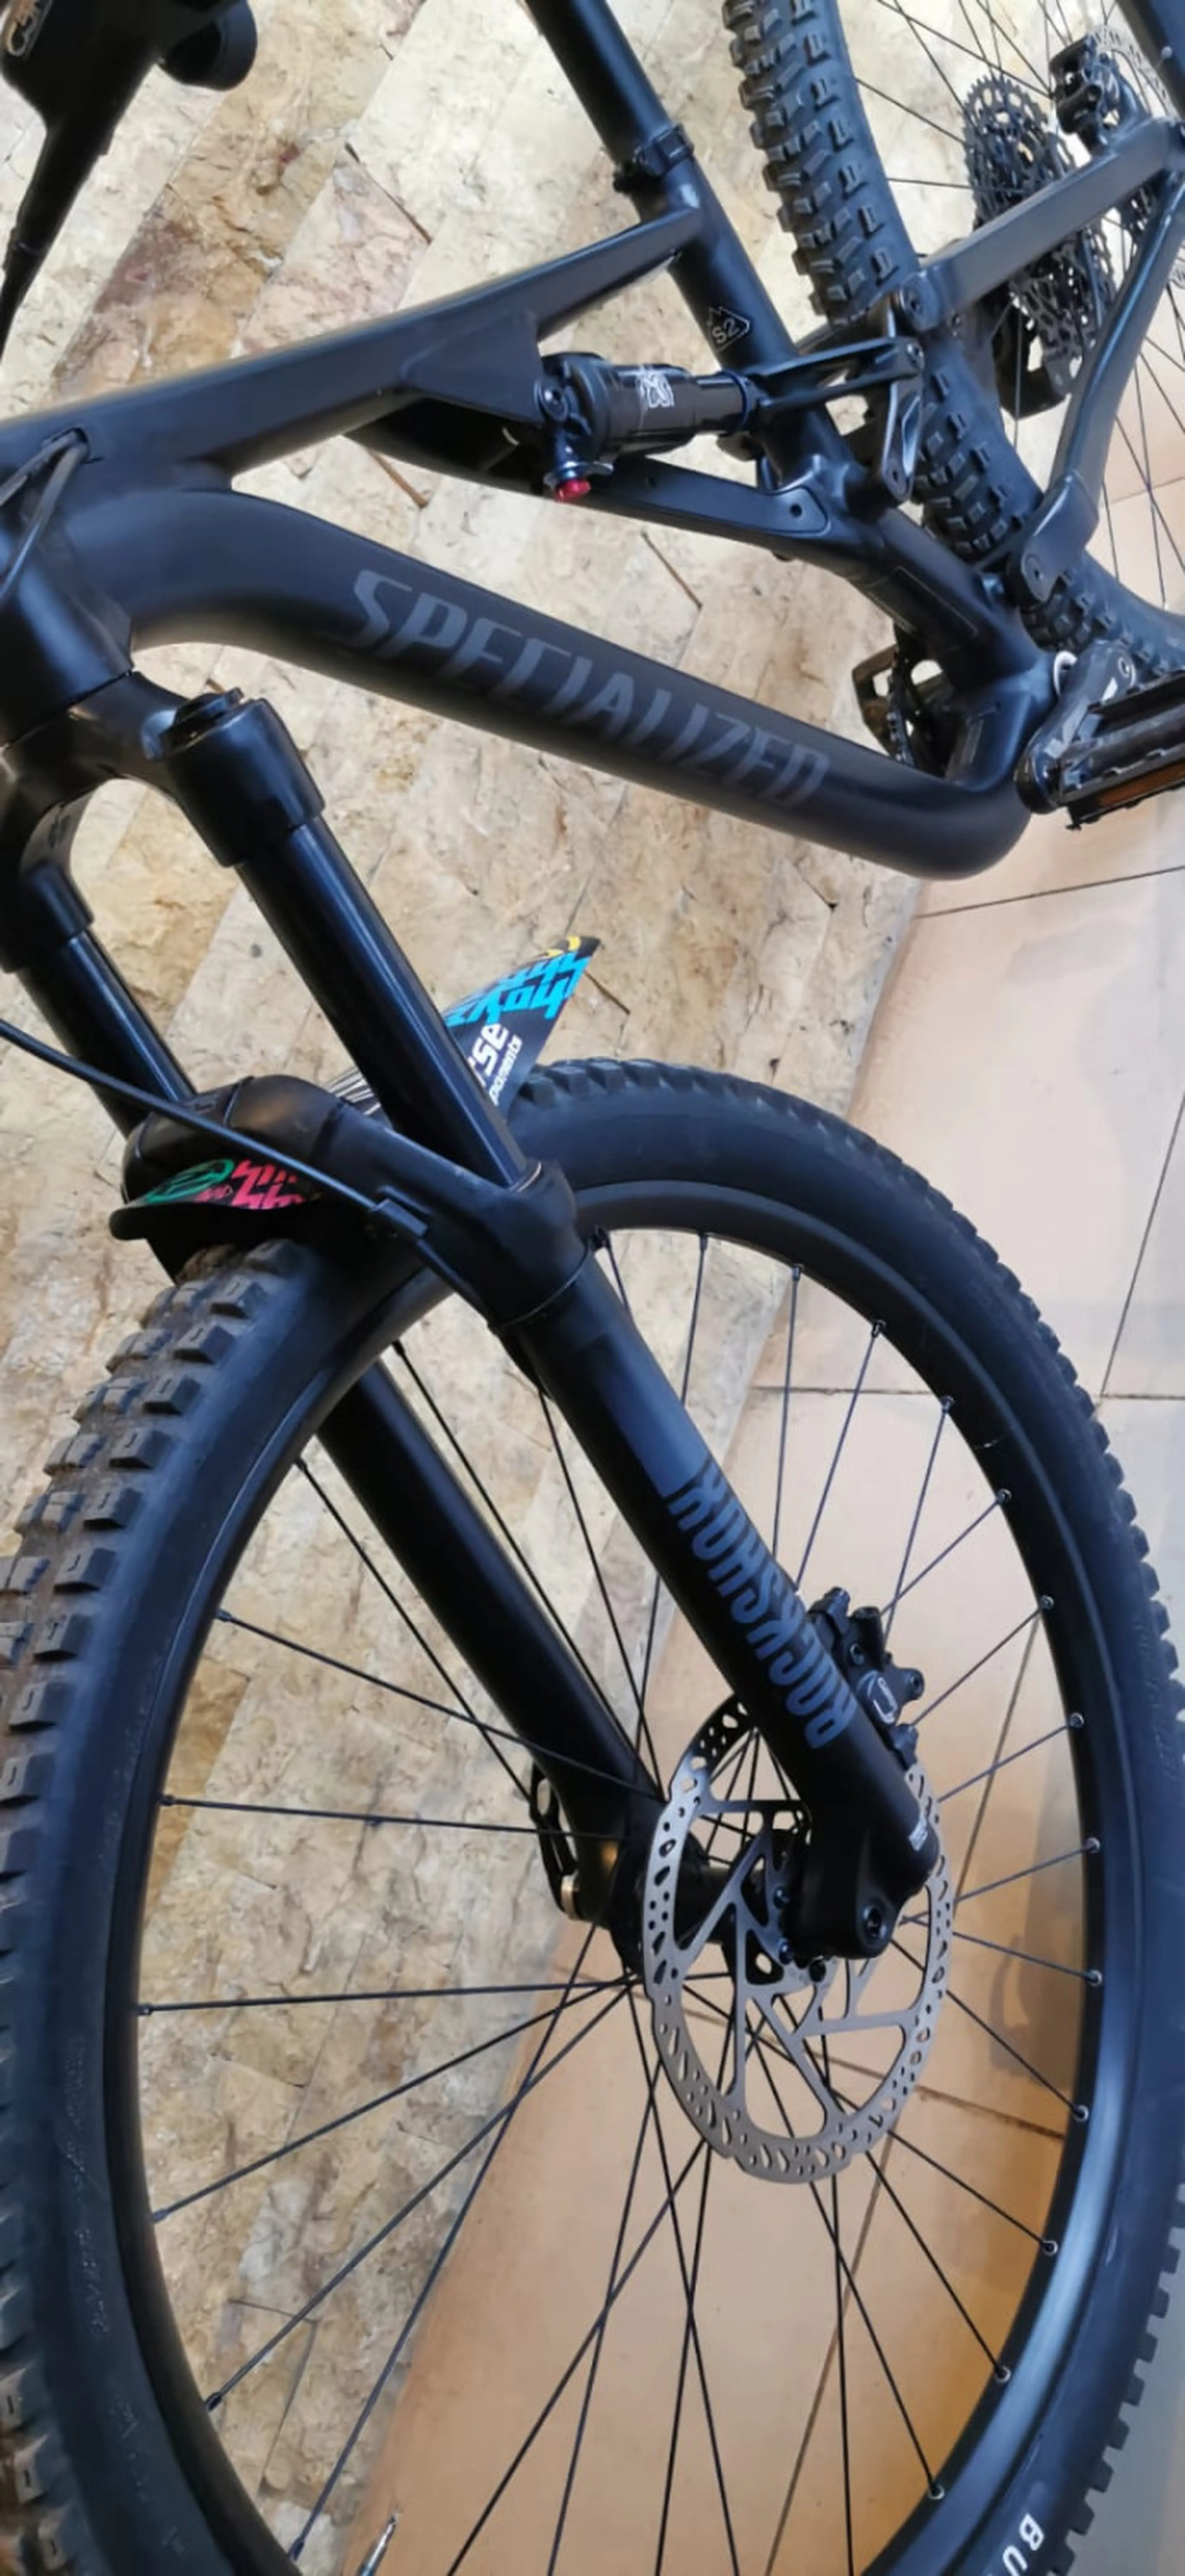 7. Specialized stumpjumper alloy